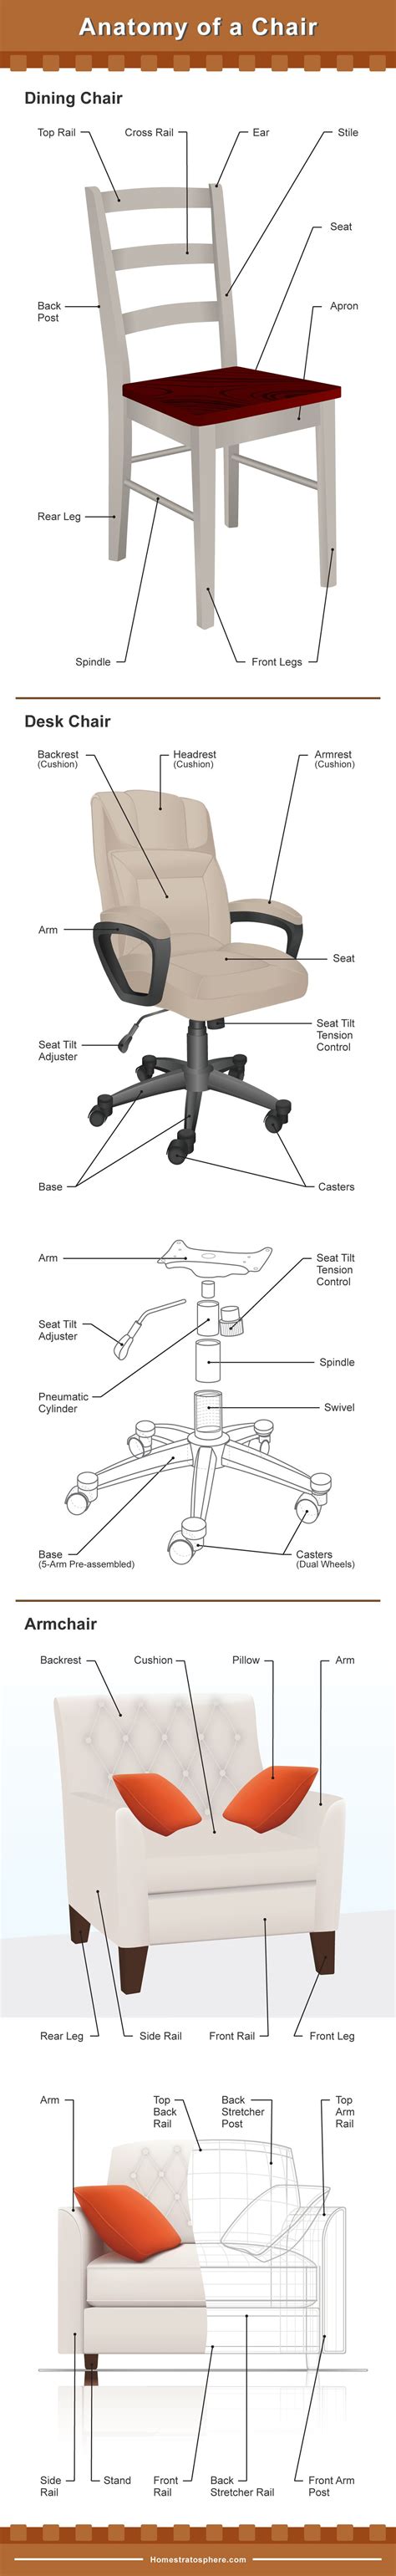 Home design ideas > chair > herman miller aeron chair parts diagram. The Different Parts of a Chair (Dining, Desk and Armchair ...